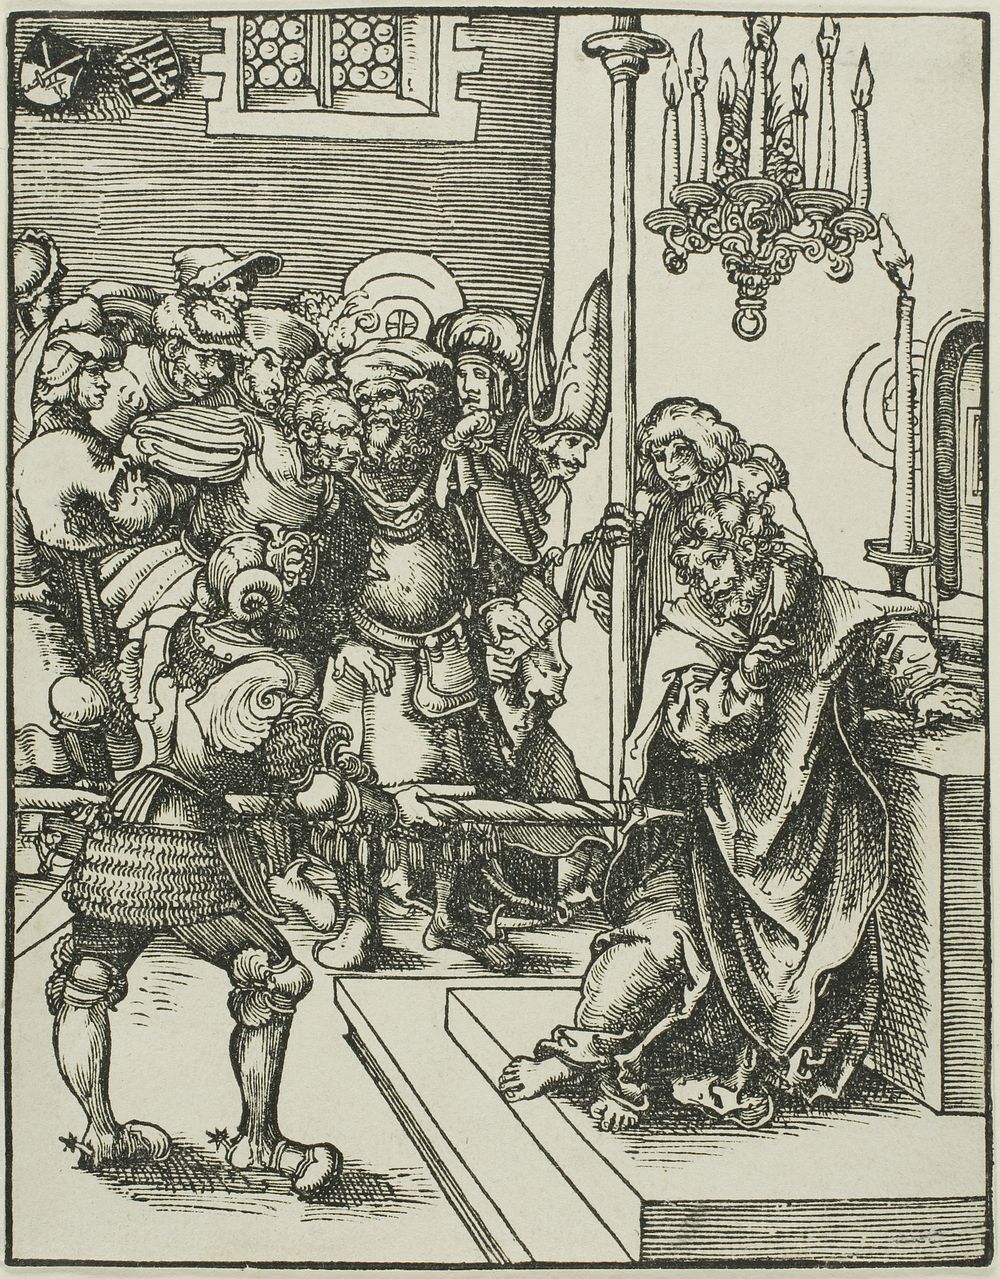 Saint Thomas, from The Martyrdom of the Apostles by Lucas Cranach, the Elder